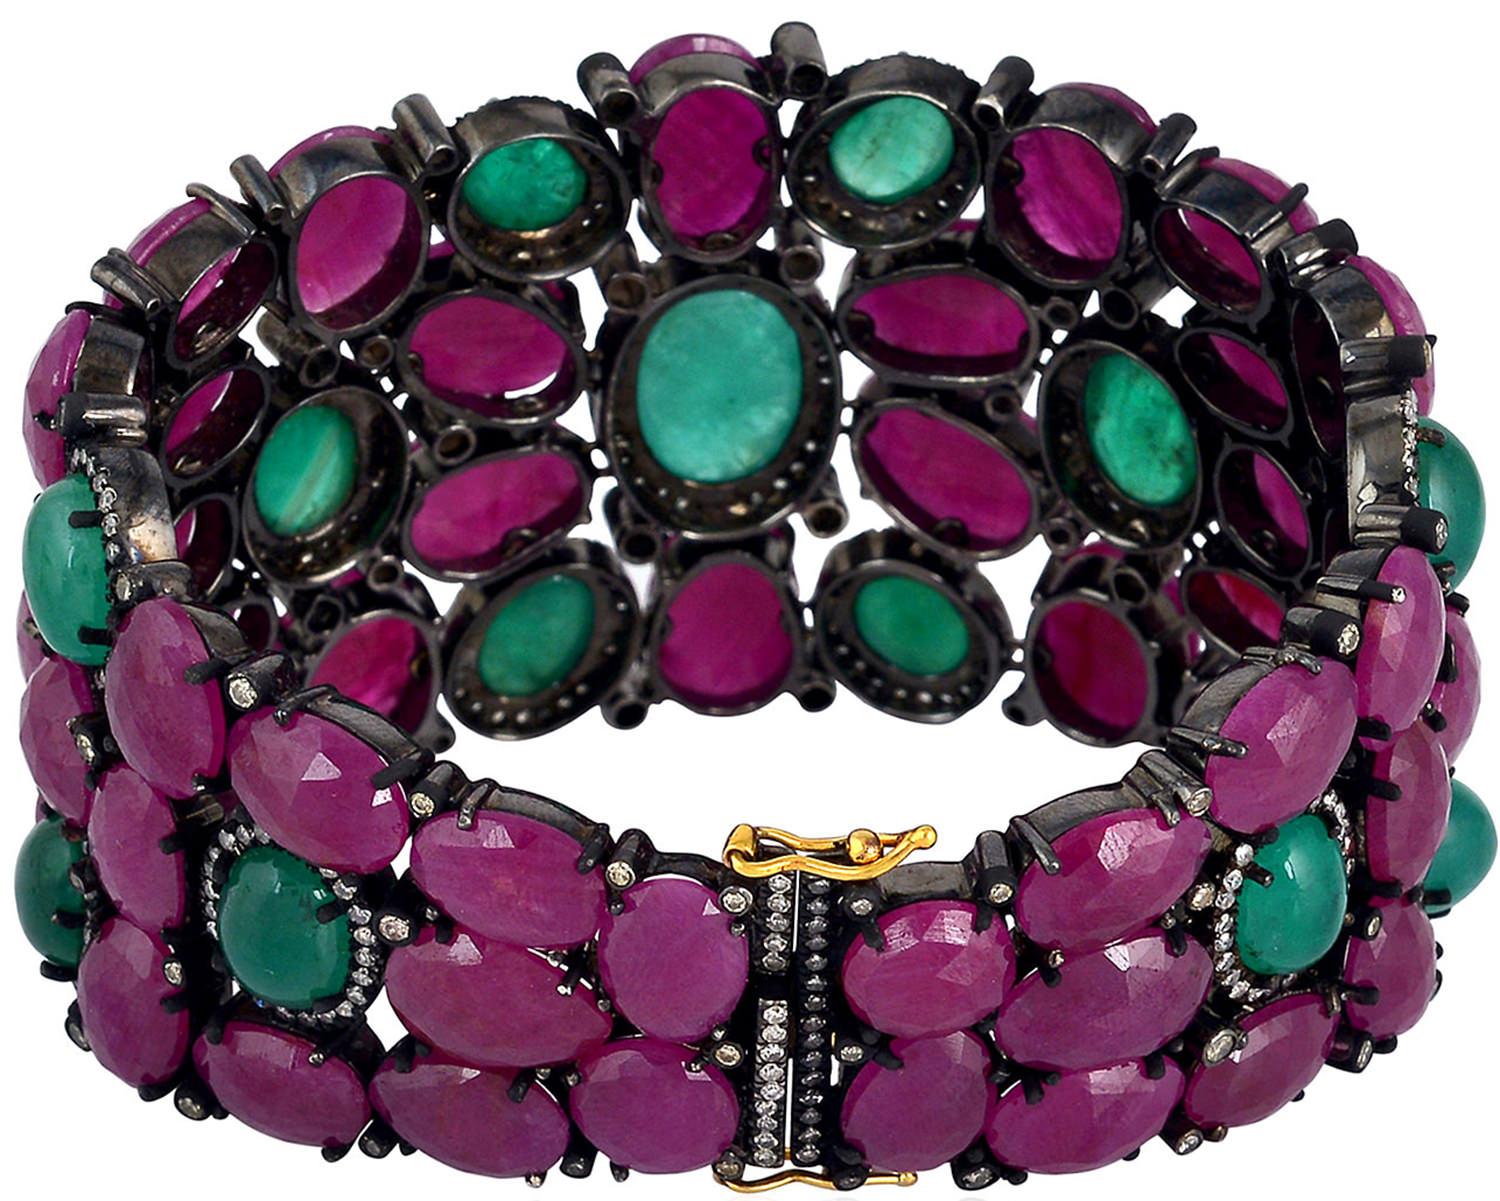 Baroque 139 Carats Natural Ruby Emerald & Diamond Bracelet 18k Gold & Silver For Sale 1